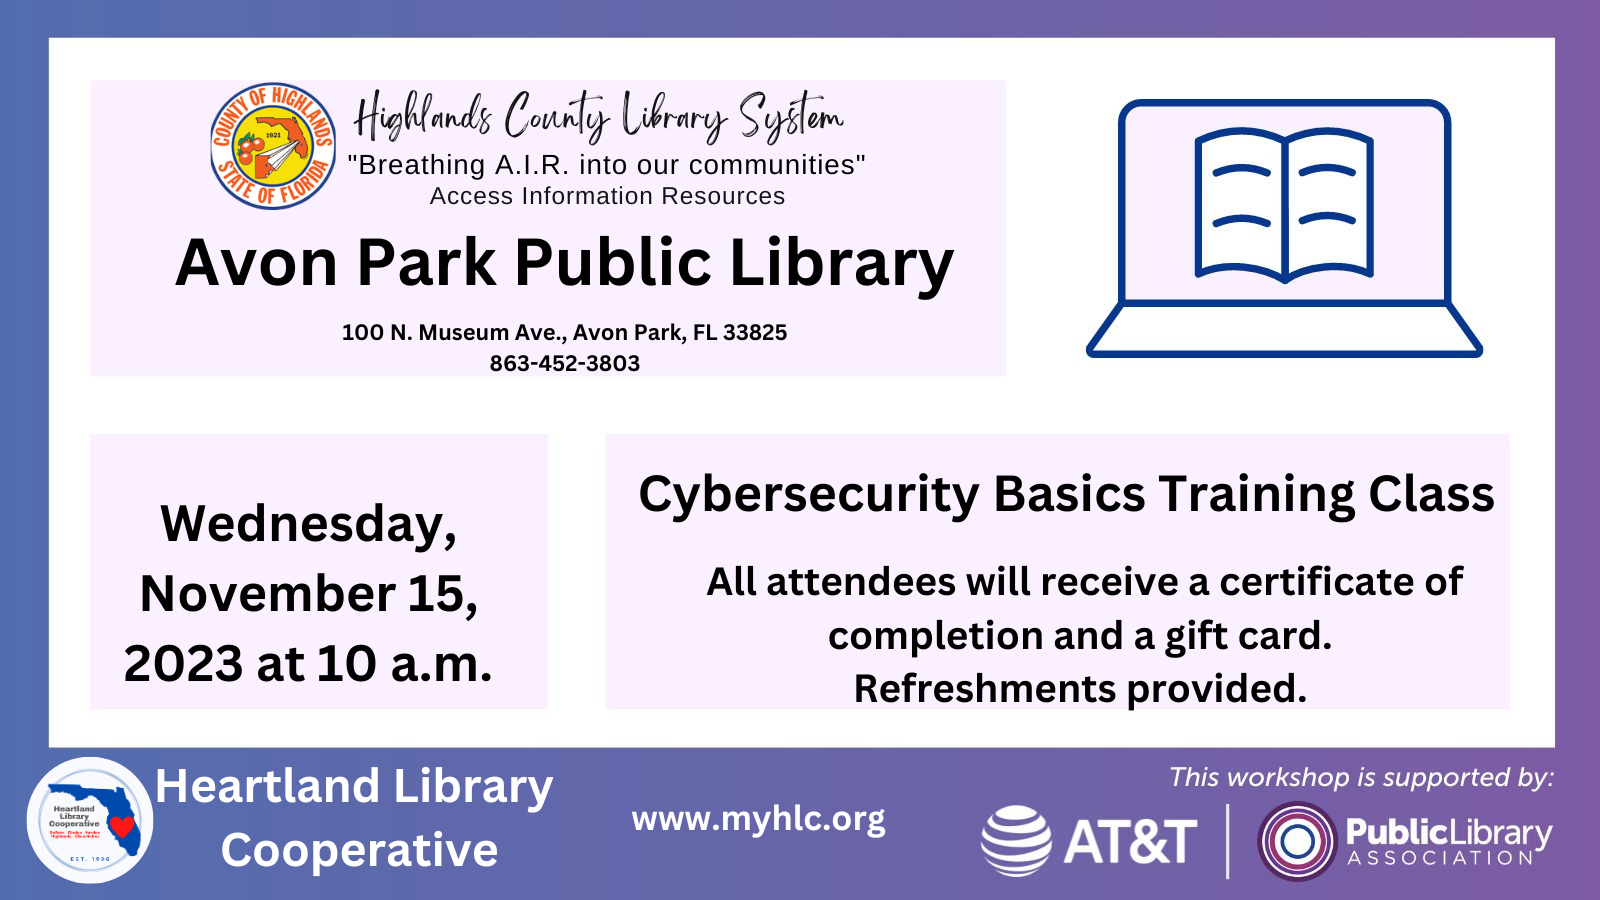 PLA AT&T Avon Park Cybersecurity graphic